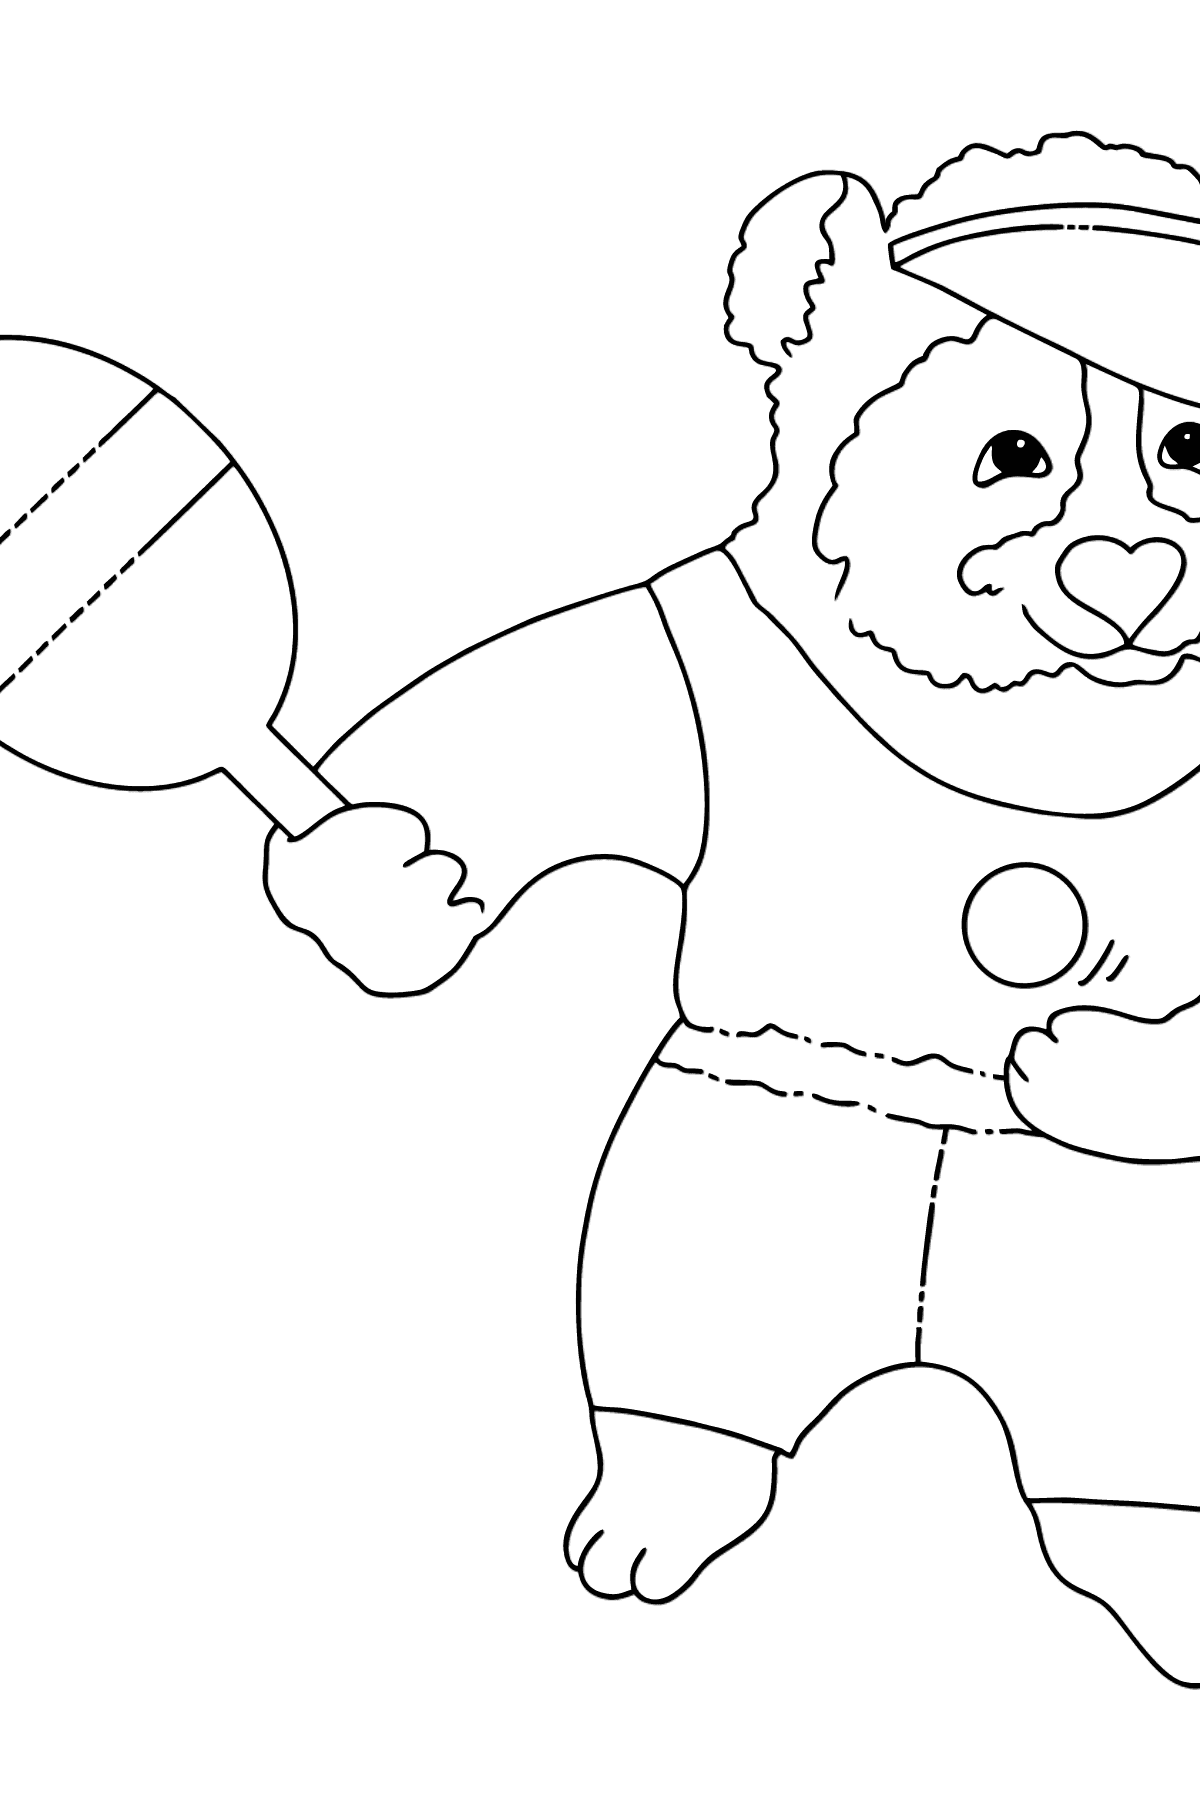 Adorable Panda (Simple) coloring page - Coloring Pages for Kids